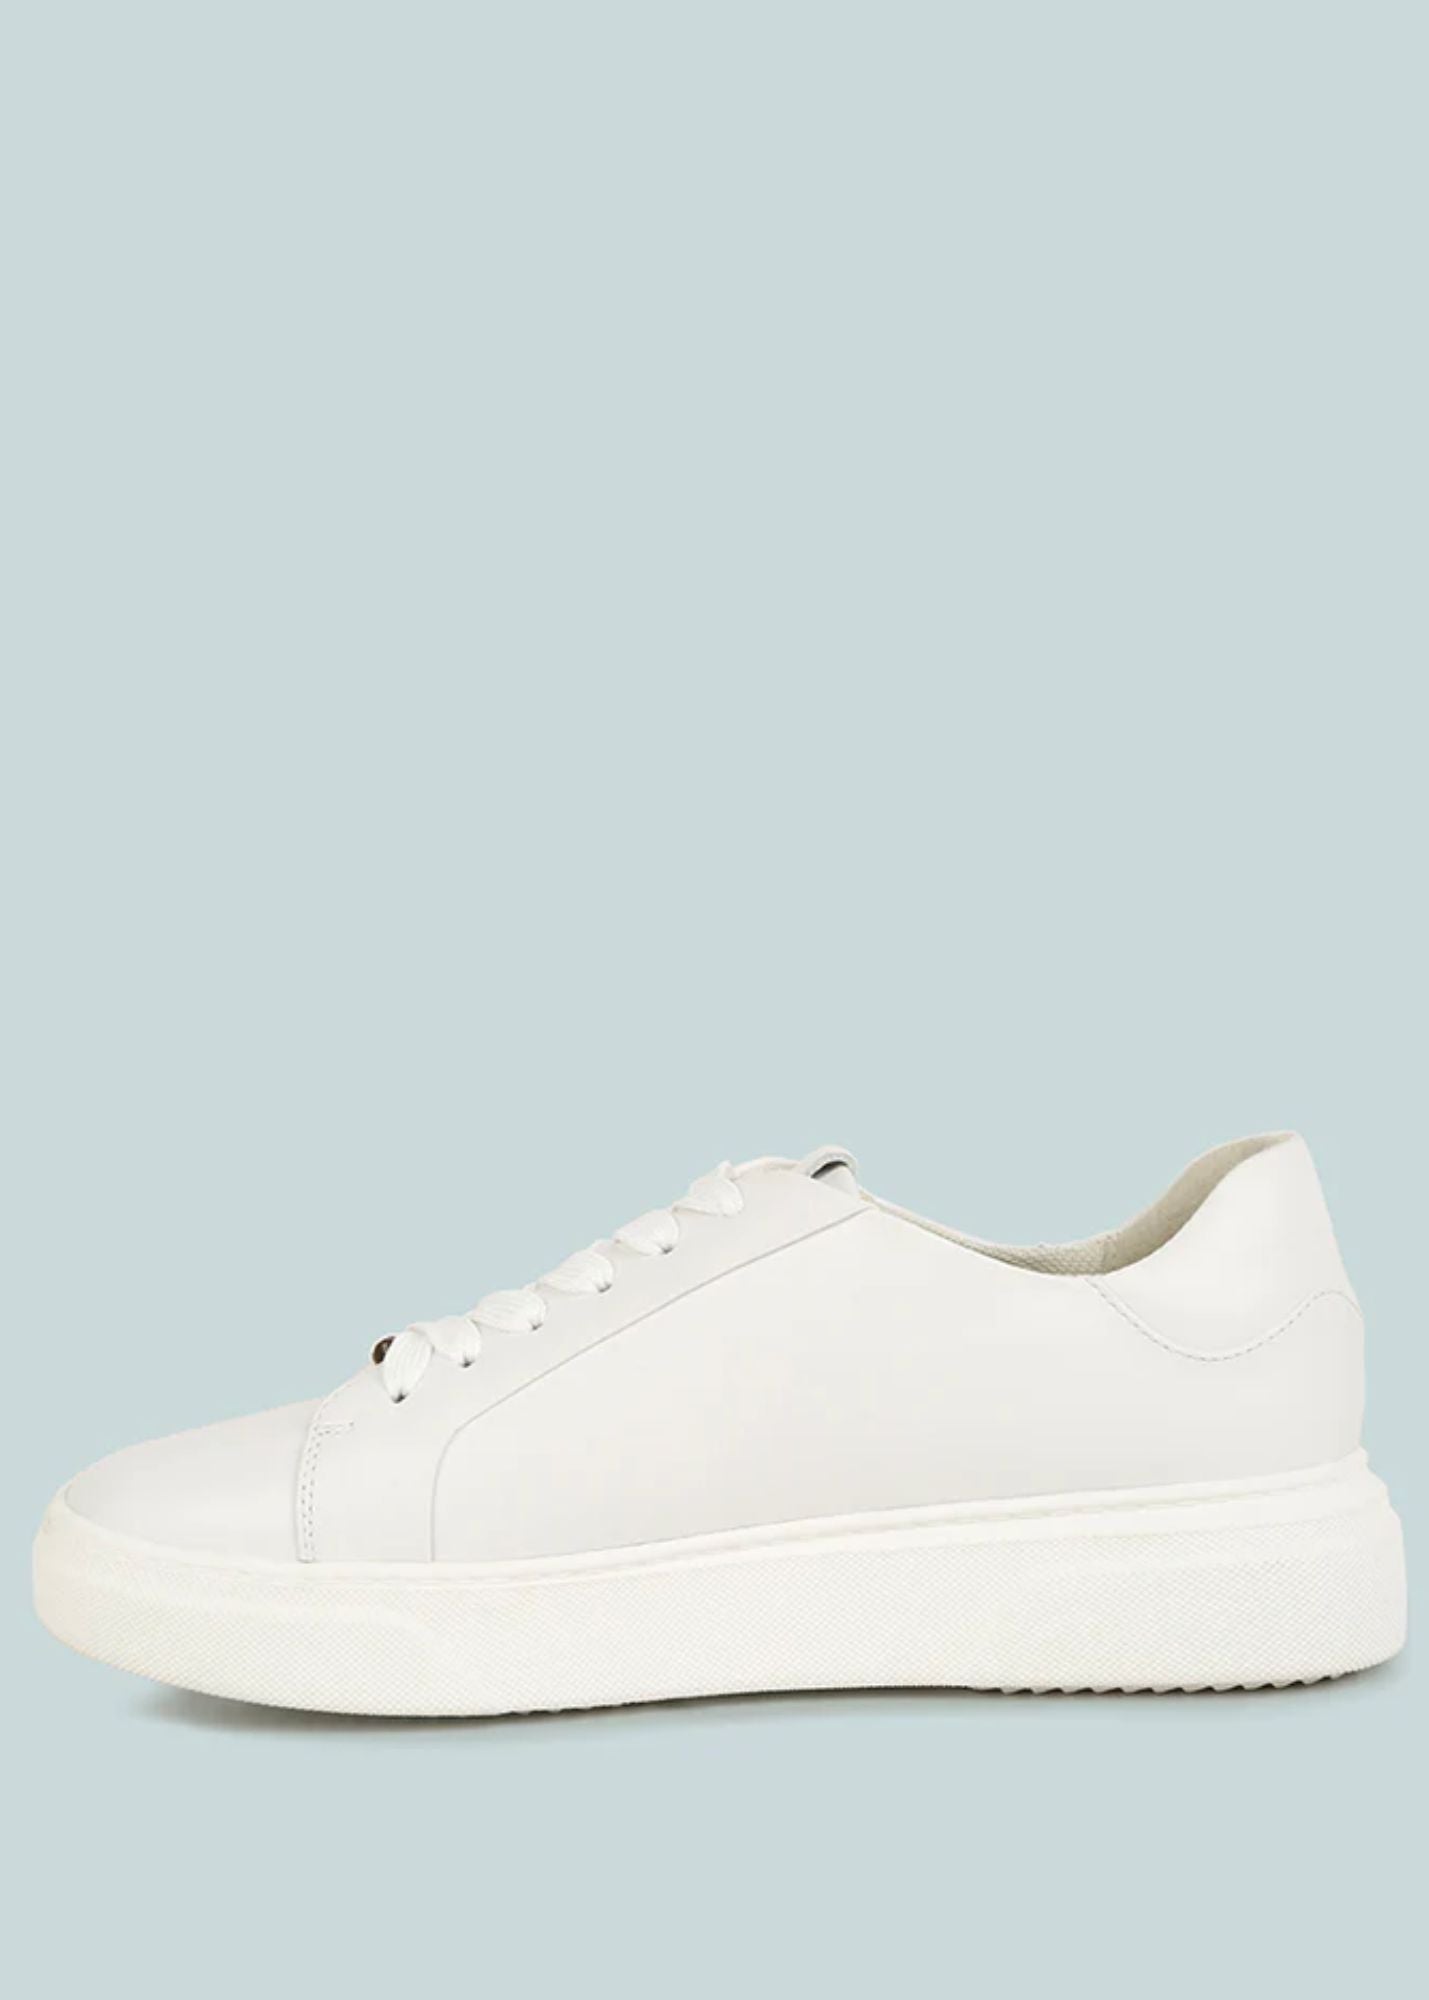 White Leather Platform Sneakers Shoes